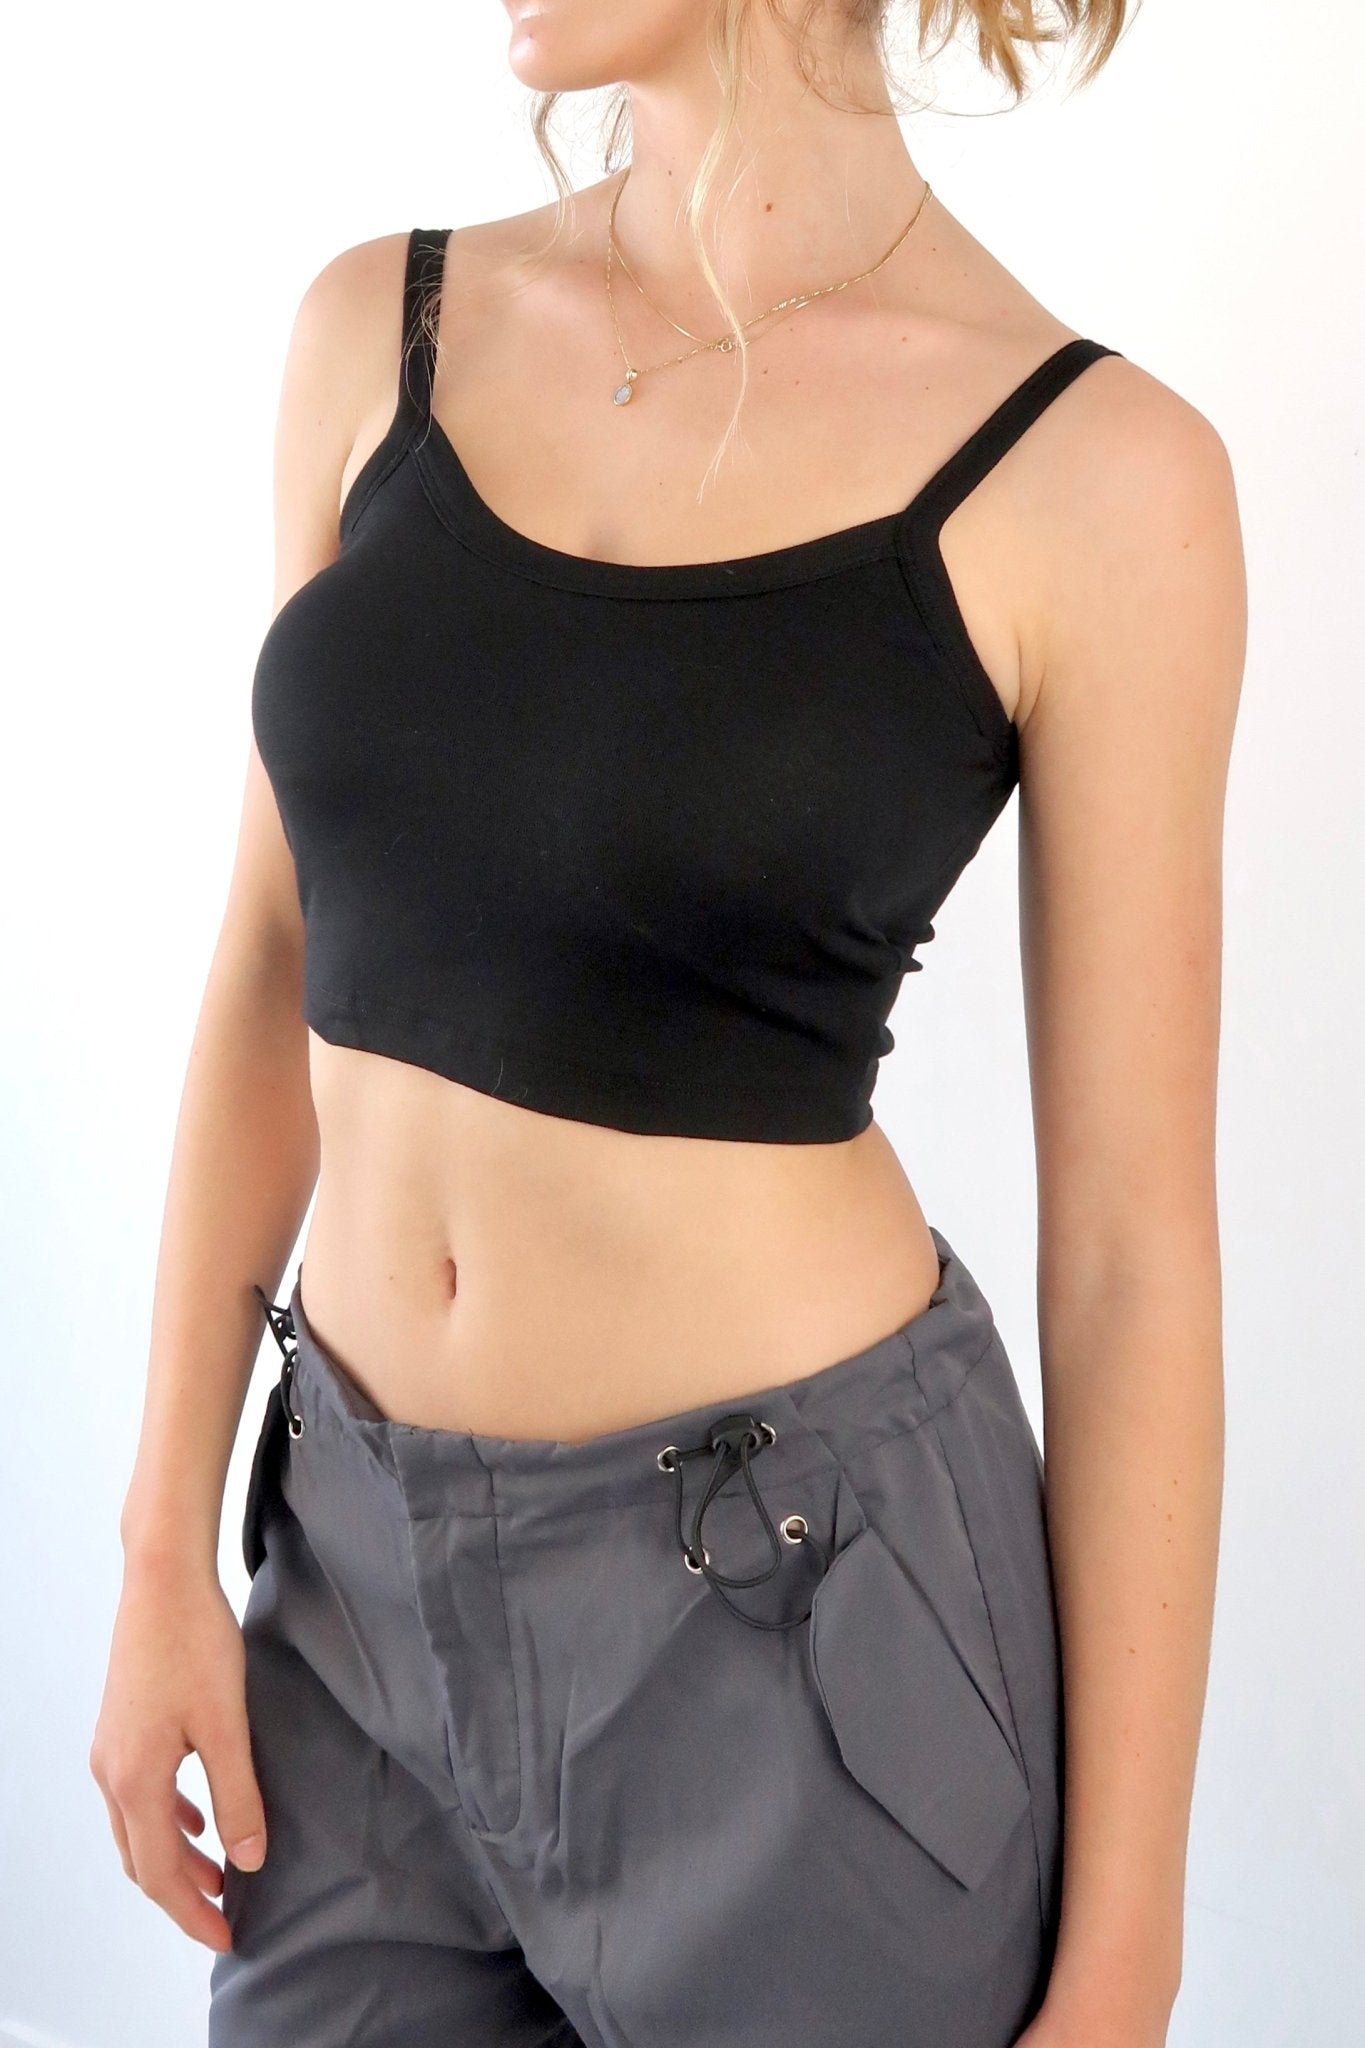 Basic 90s cami - SCG_COLLECTIONSTop